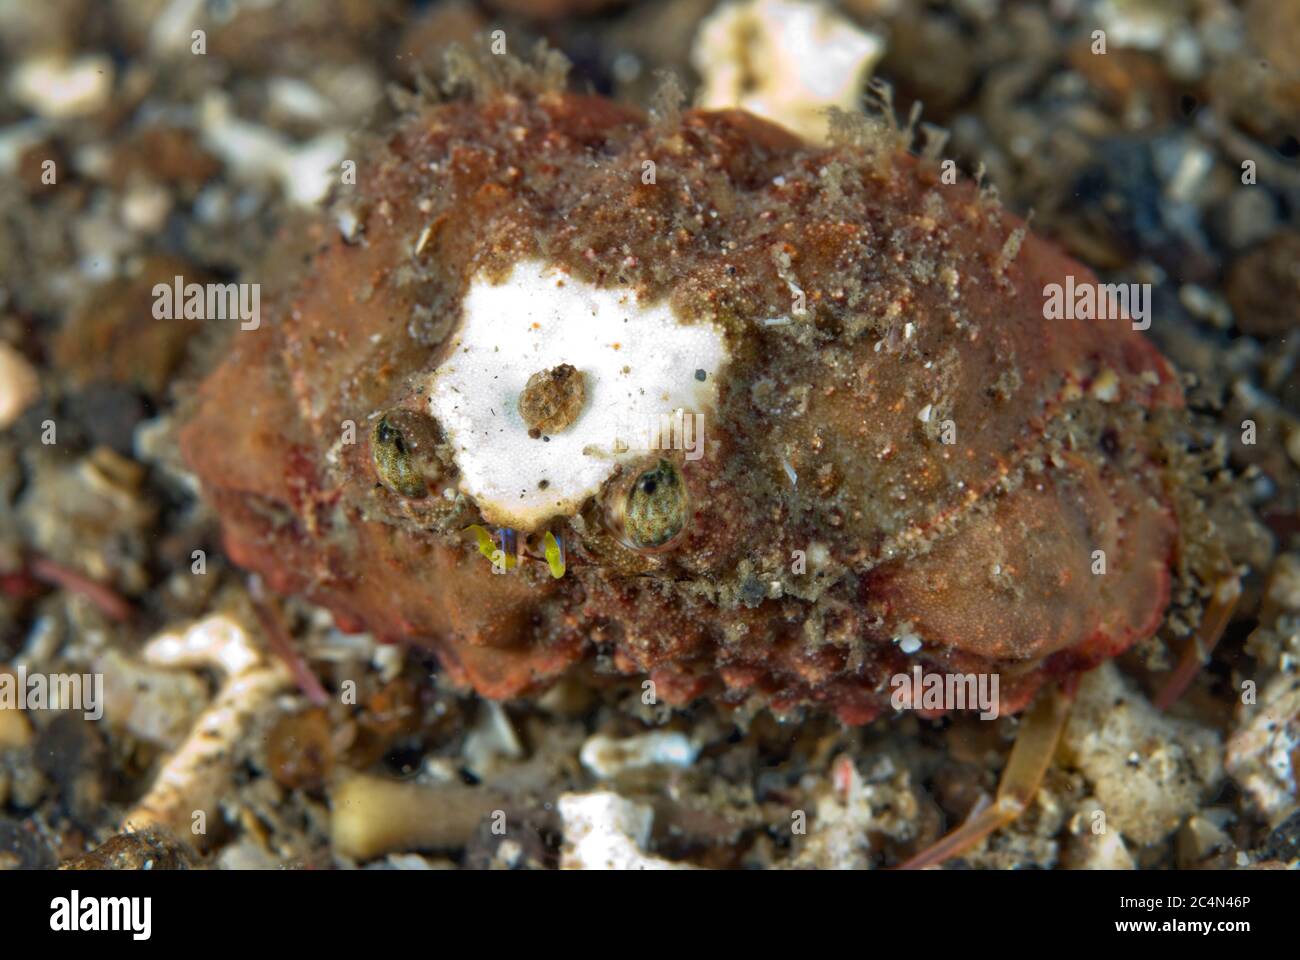 Box Crab,m Calappa sp, with white spot, Nudi Falls dive site, Lembeh Straits, Sulawesi, Indonesia Stock Photo